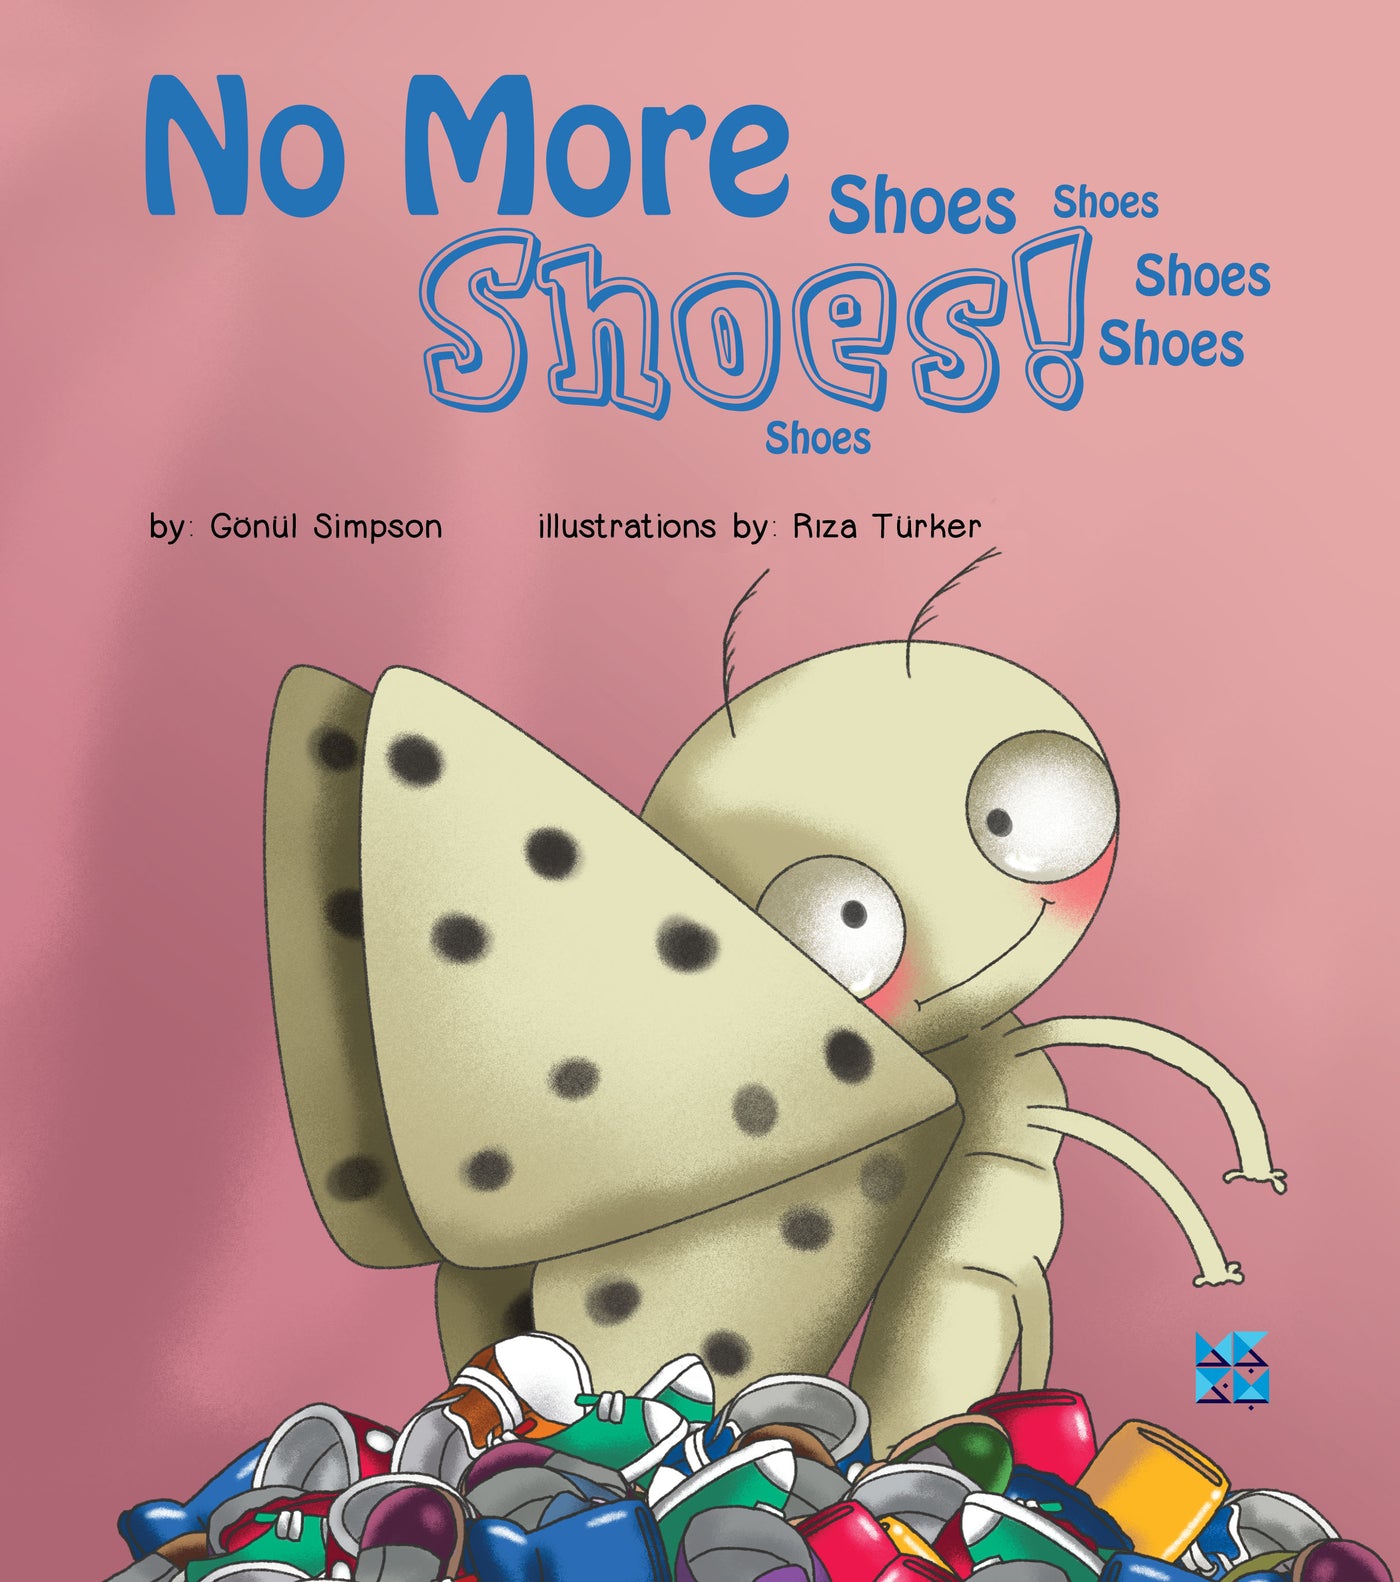 No more Shoes - Book Series Cover